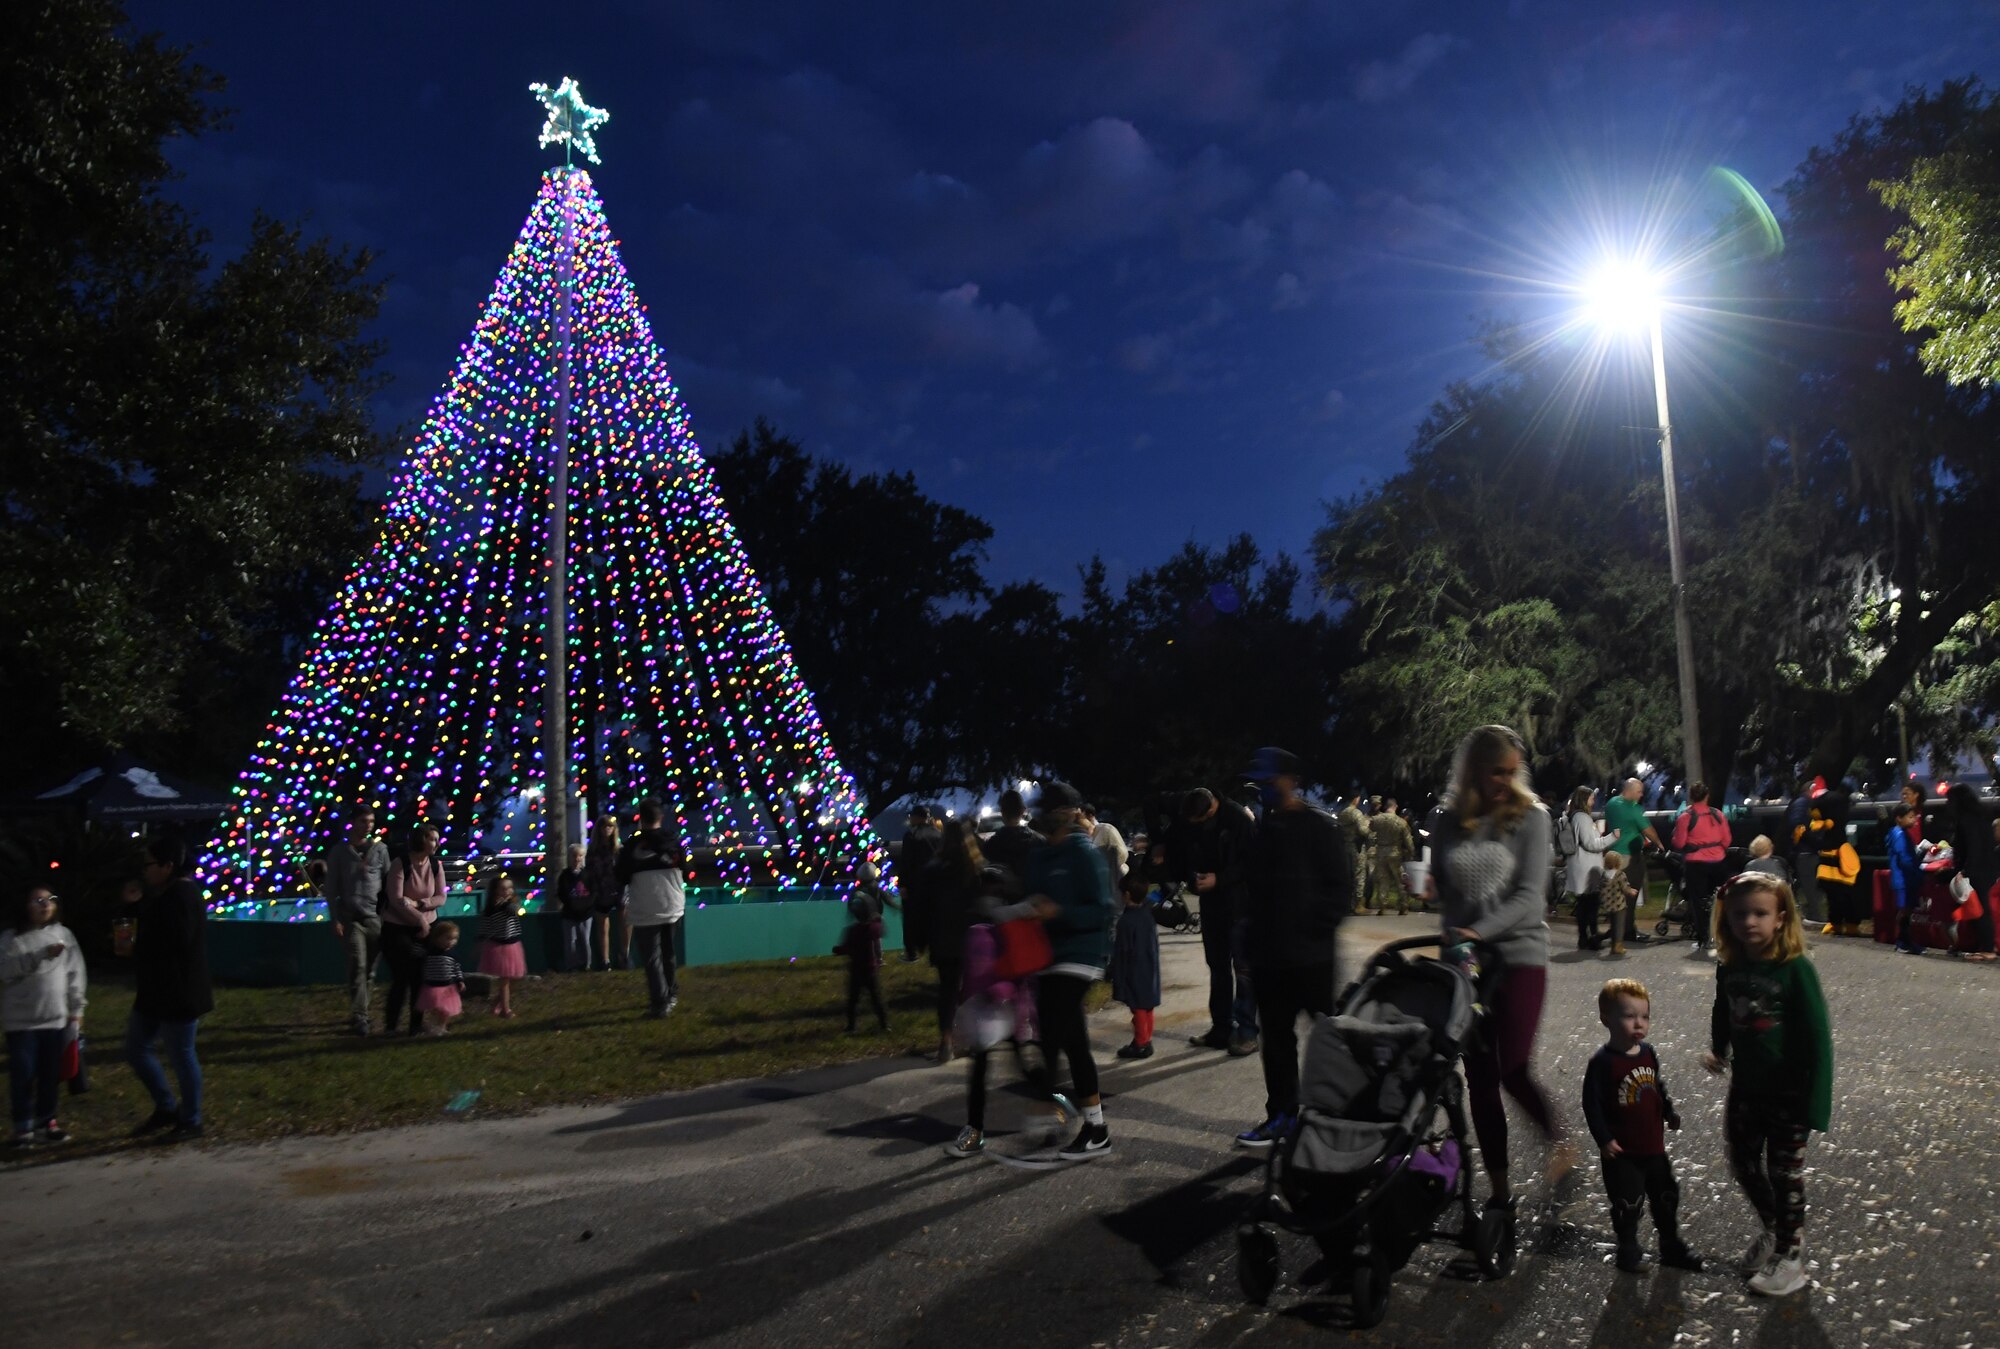 Keesler families attend the 2021 Winter Fest at the marina park on Keesler Air Force Base, Mississippi, Dec. 3, 2021. The event, which included a visit with Santa and a tree lighting ceremony, was held in celebration of the holiday season. (U.S. Air Force photo by Kemberly Groue)